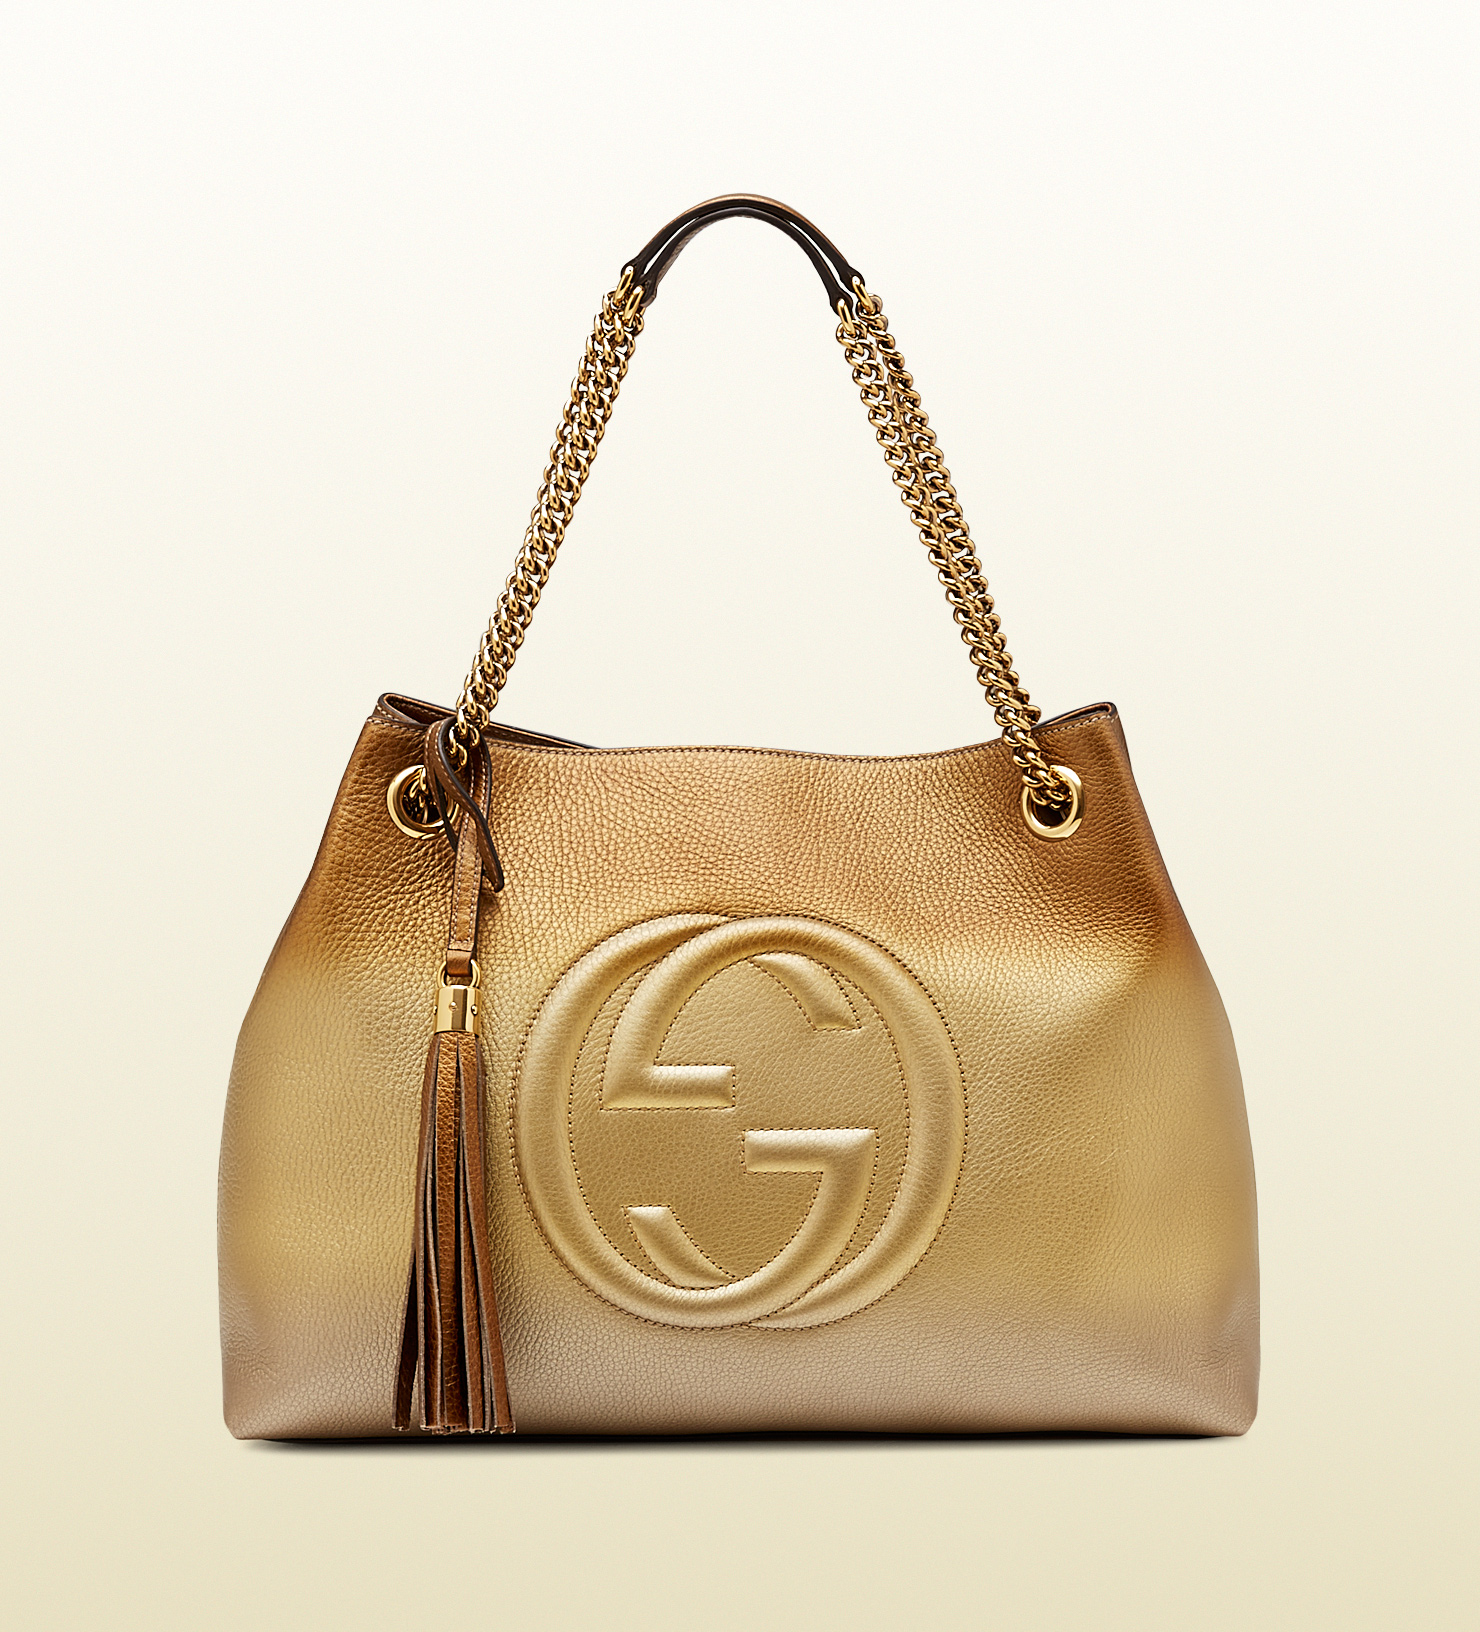 Gucci Soho Shaded Leather Shoulder Bag in Gold (beige) | Lyst